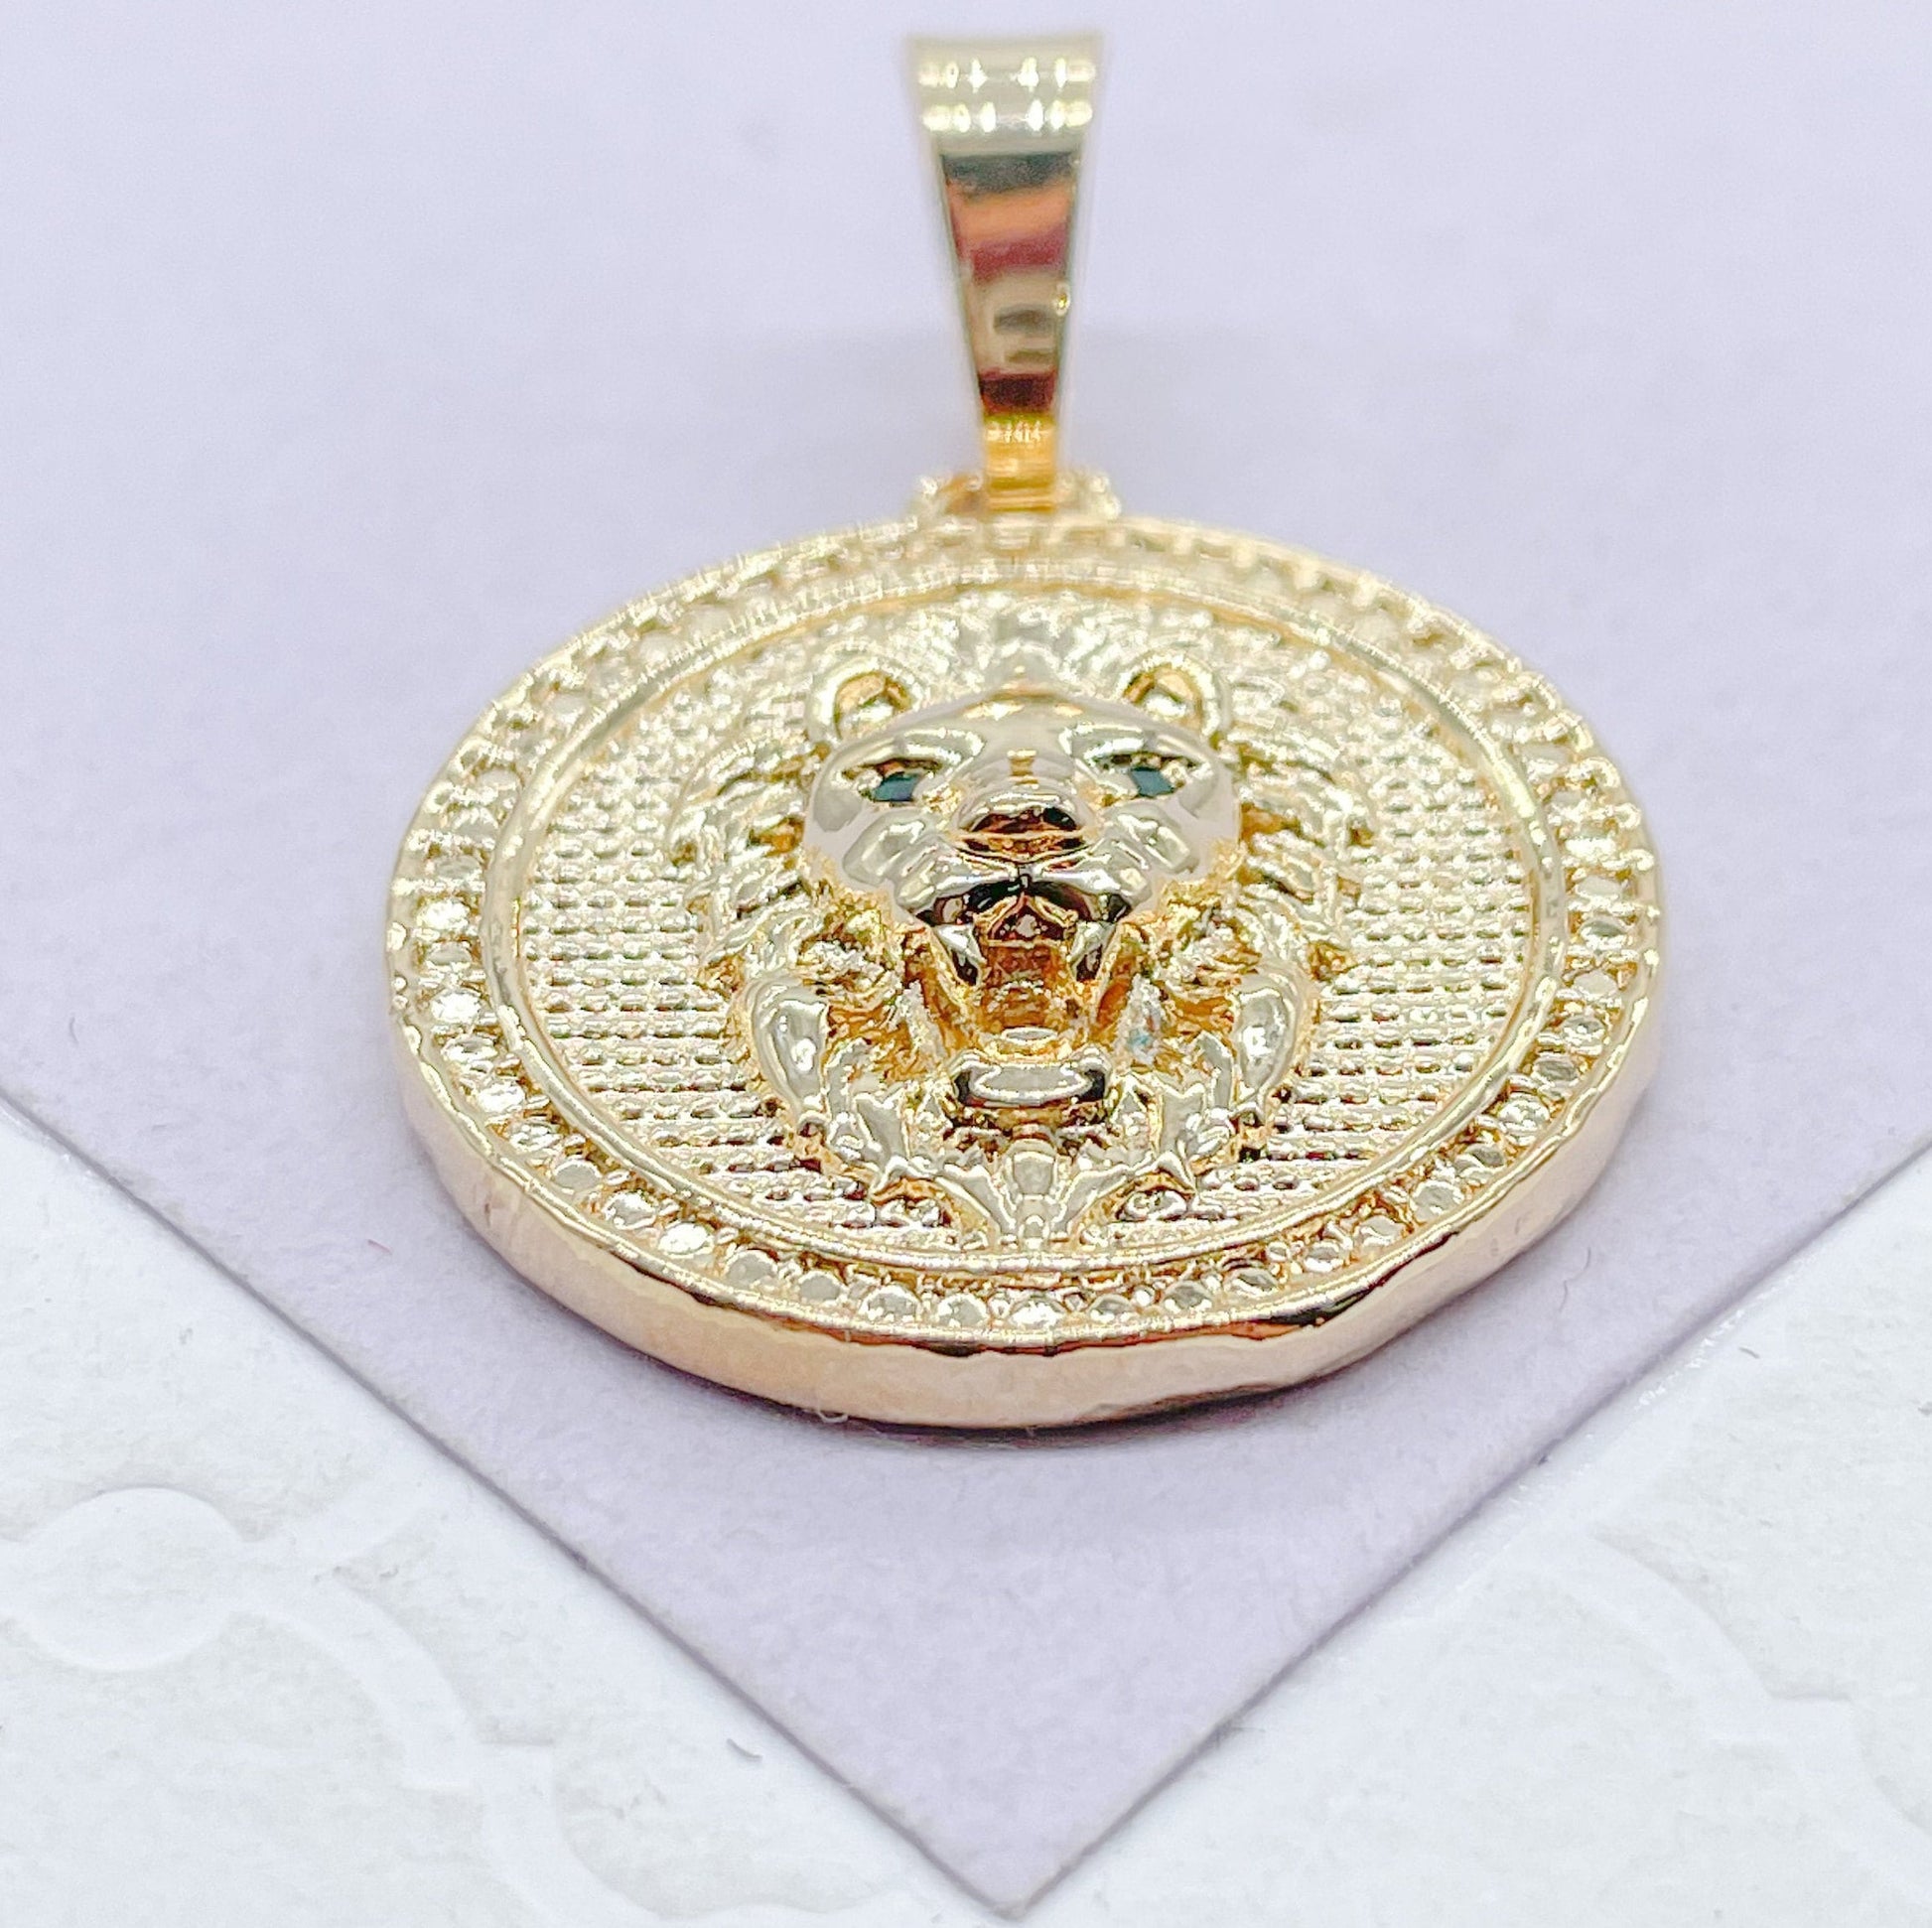 18k Gold Filled Lion Head Medallion Pendant With With Engraved Patters And Emerald Green Eye Stones